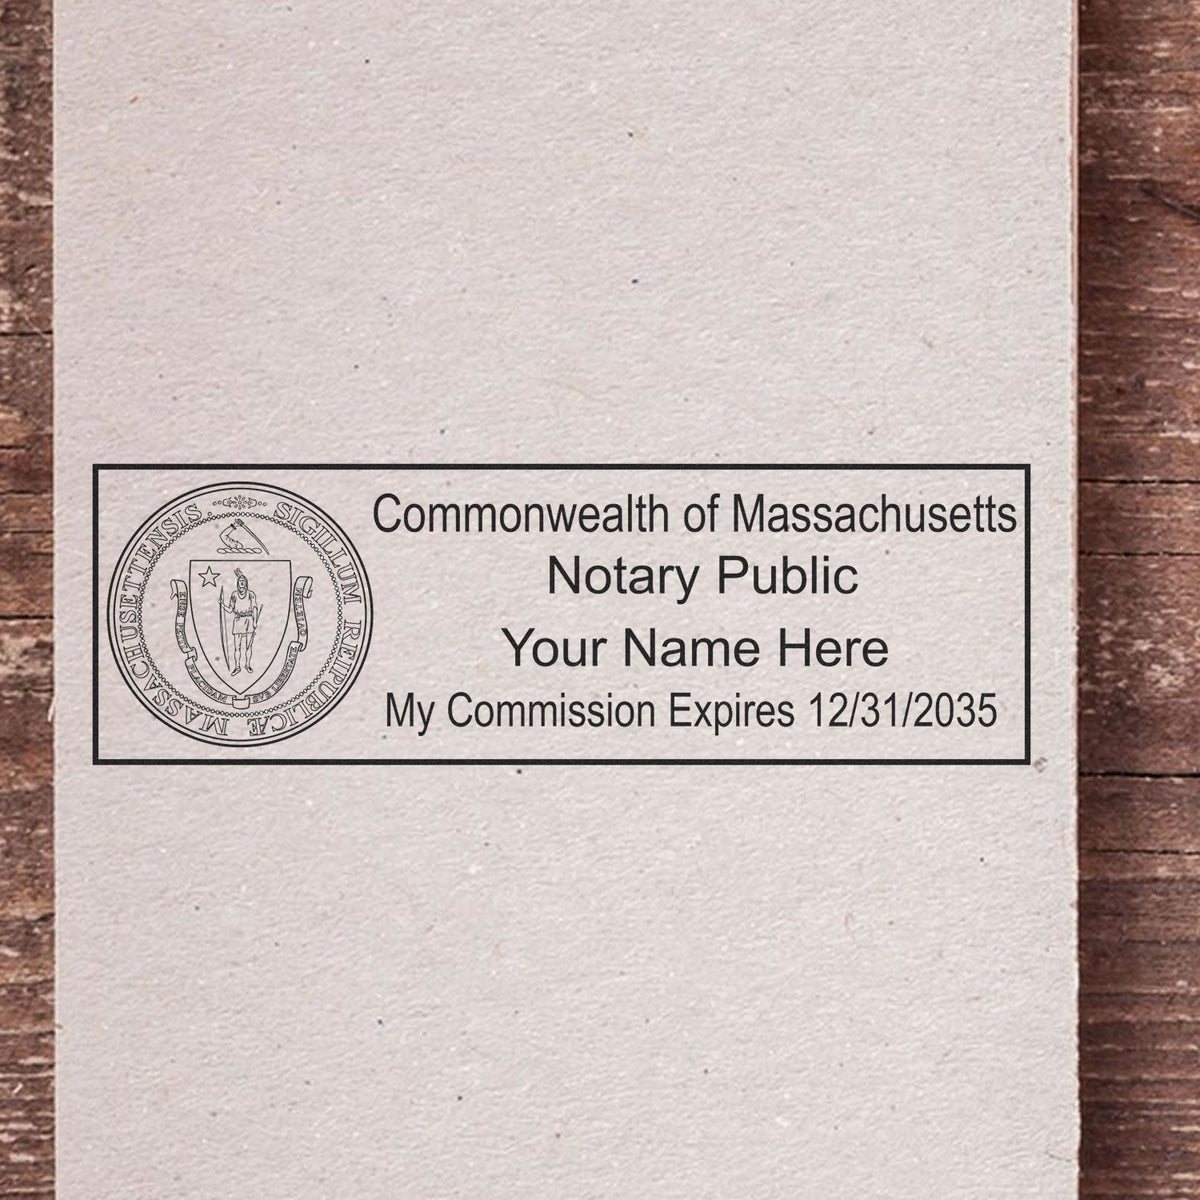 A lifestyle photo showing a stamped image of the Wooden Handle Massachusetts State Seal Notary Public Stamp on a piece of paper